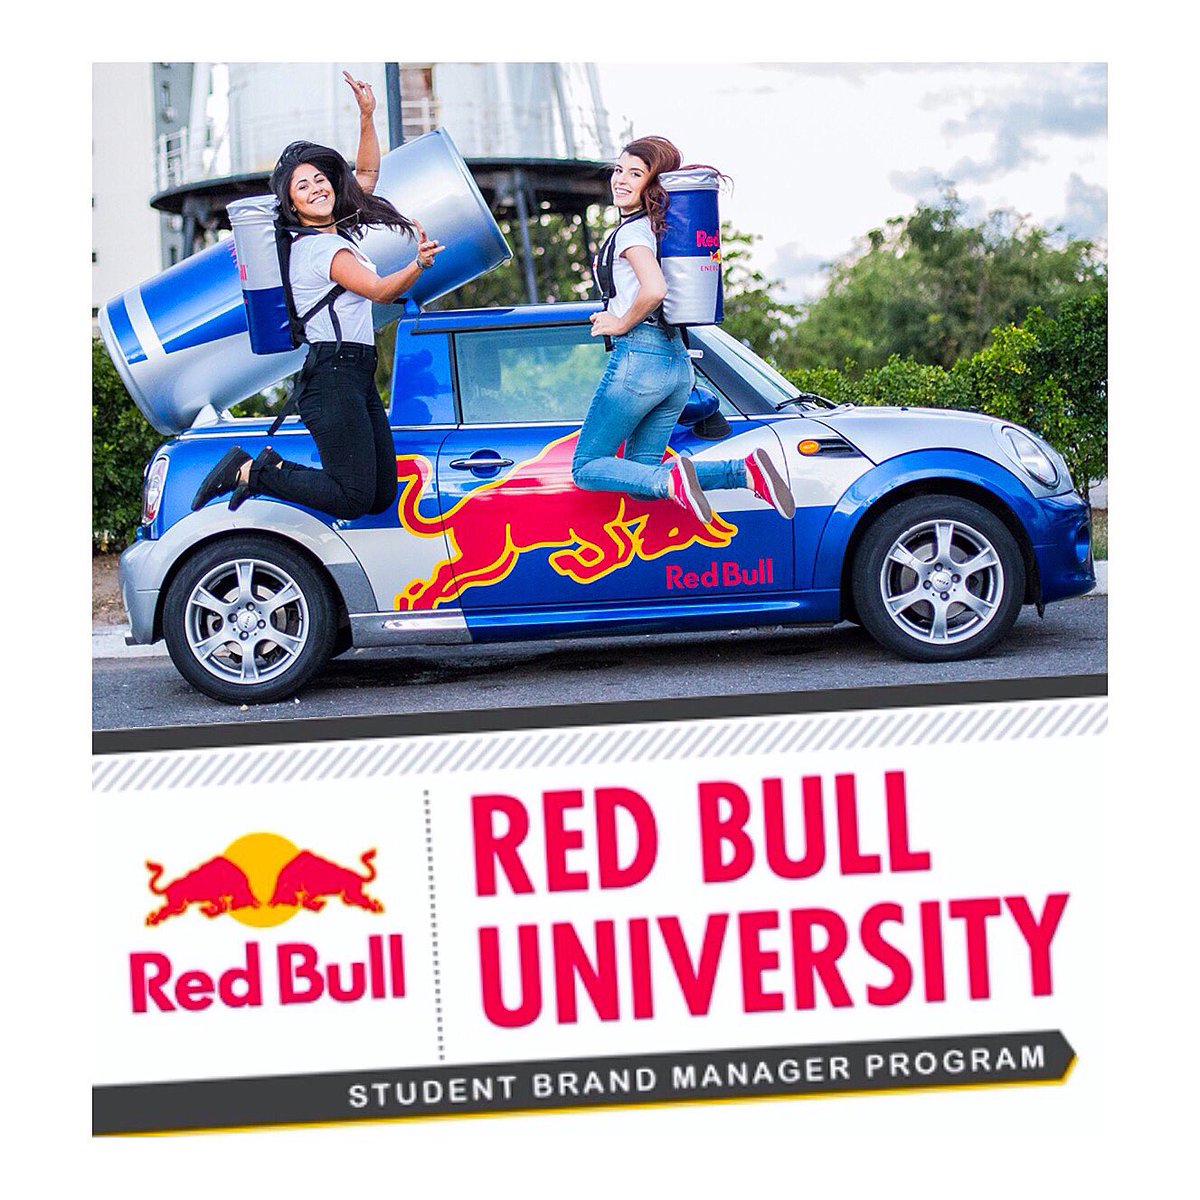 Officially Live ar Twitter: “Attention #AUC Students! @RedBull is 👀for a Student Brand Manager in the AUC, & it's a paid position. APPLY TODAY! 👉🏾https://t.co/PHkFIrC1iM… https://t.co/mOI3tBF4KM”